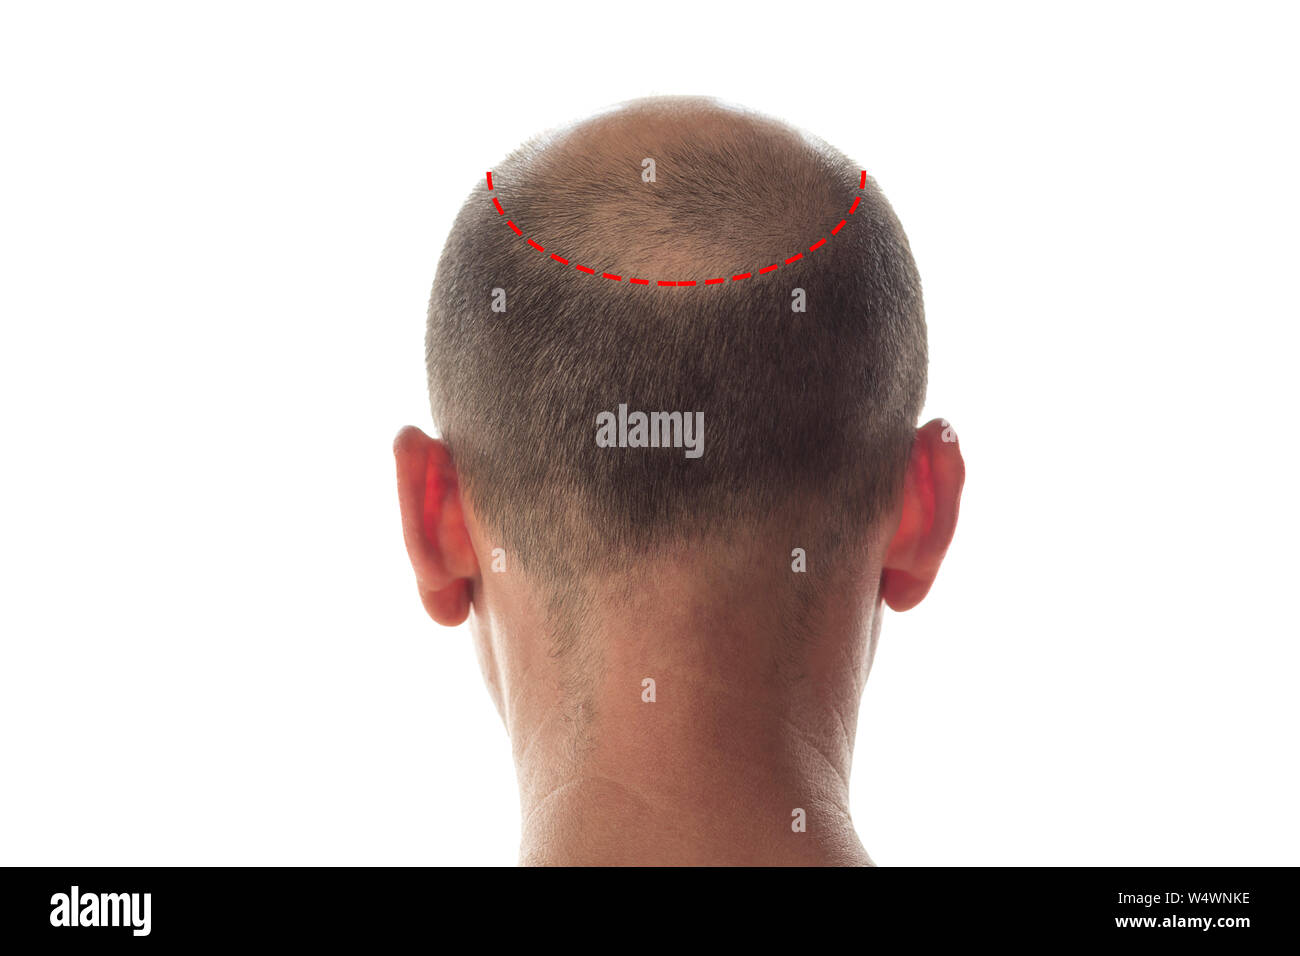 Bald man back view, head with hair loss Stock Photo